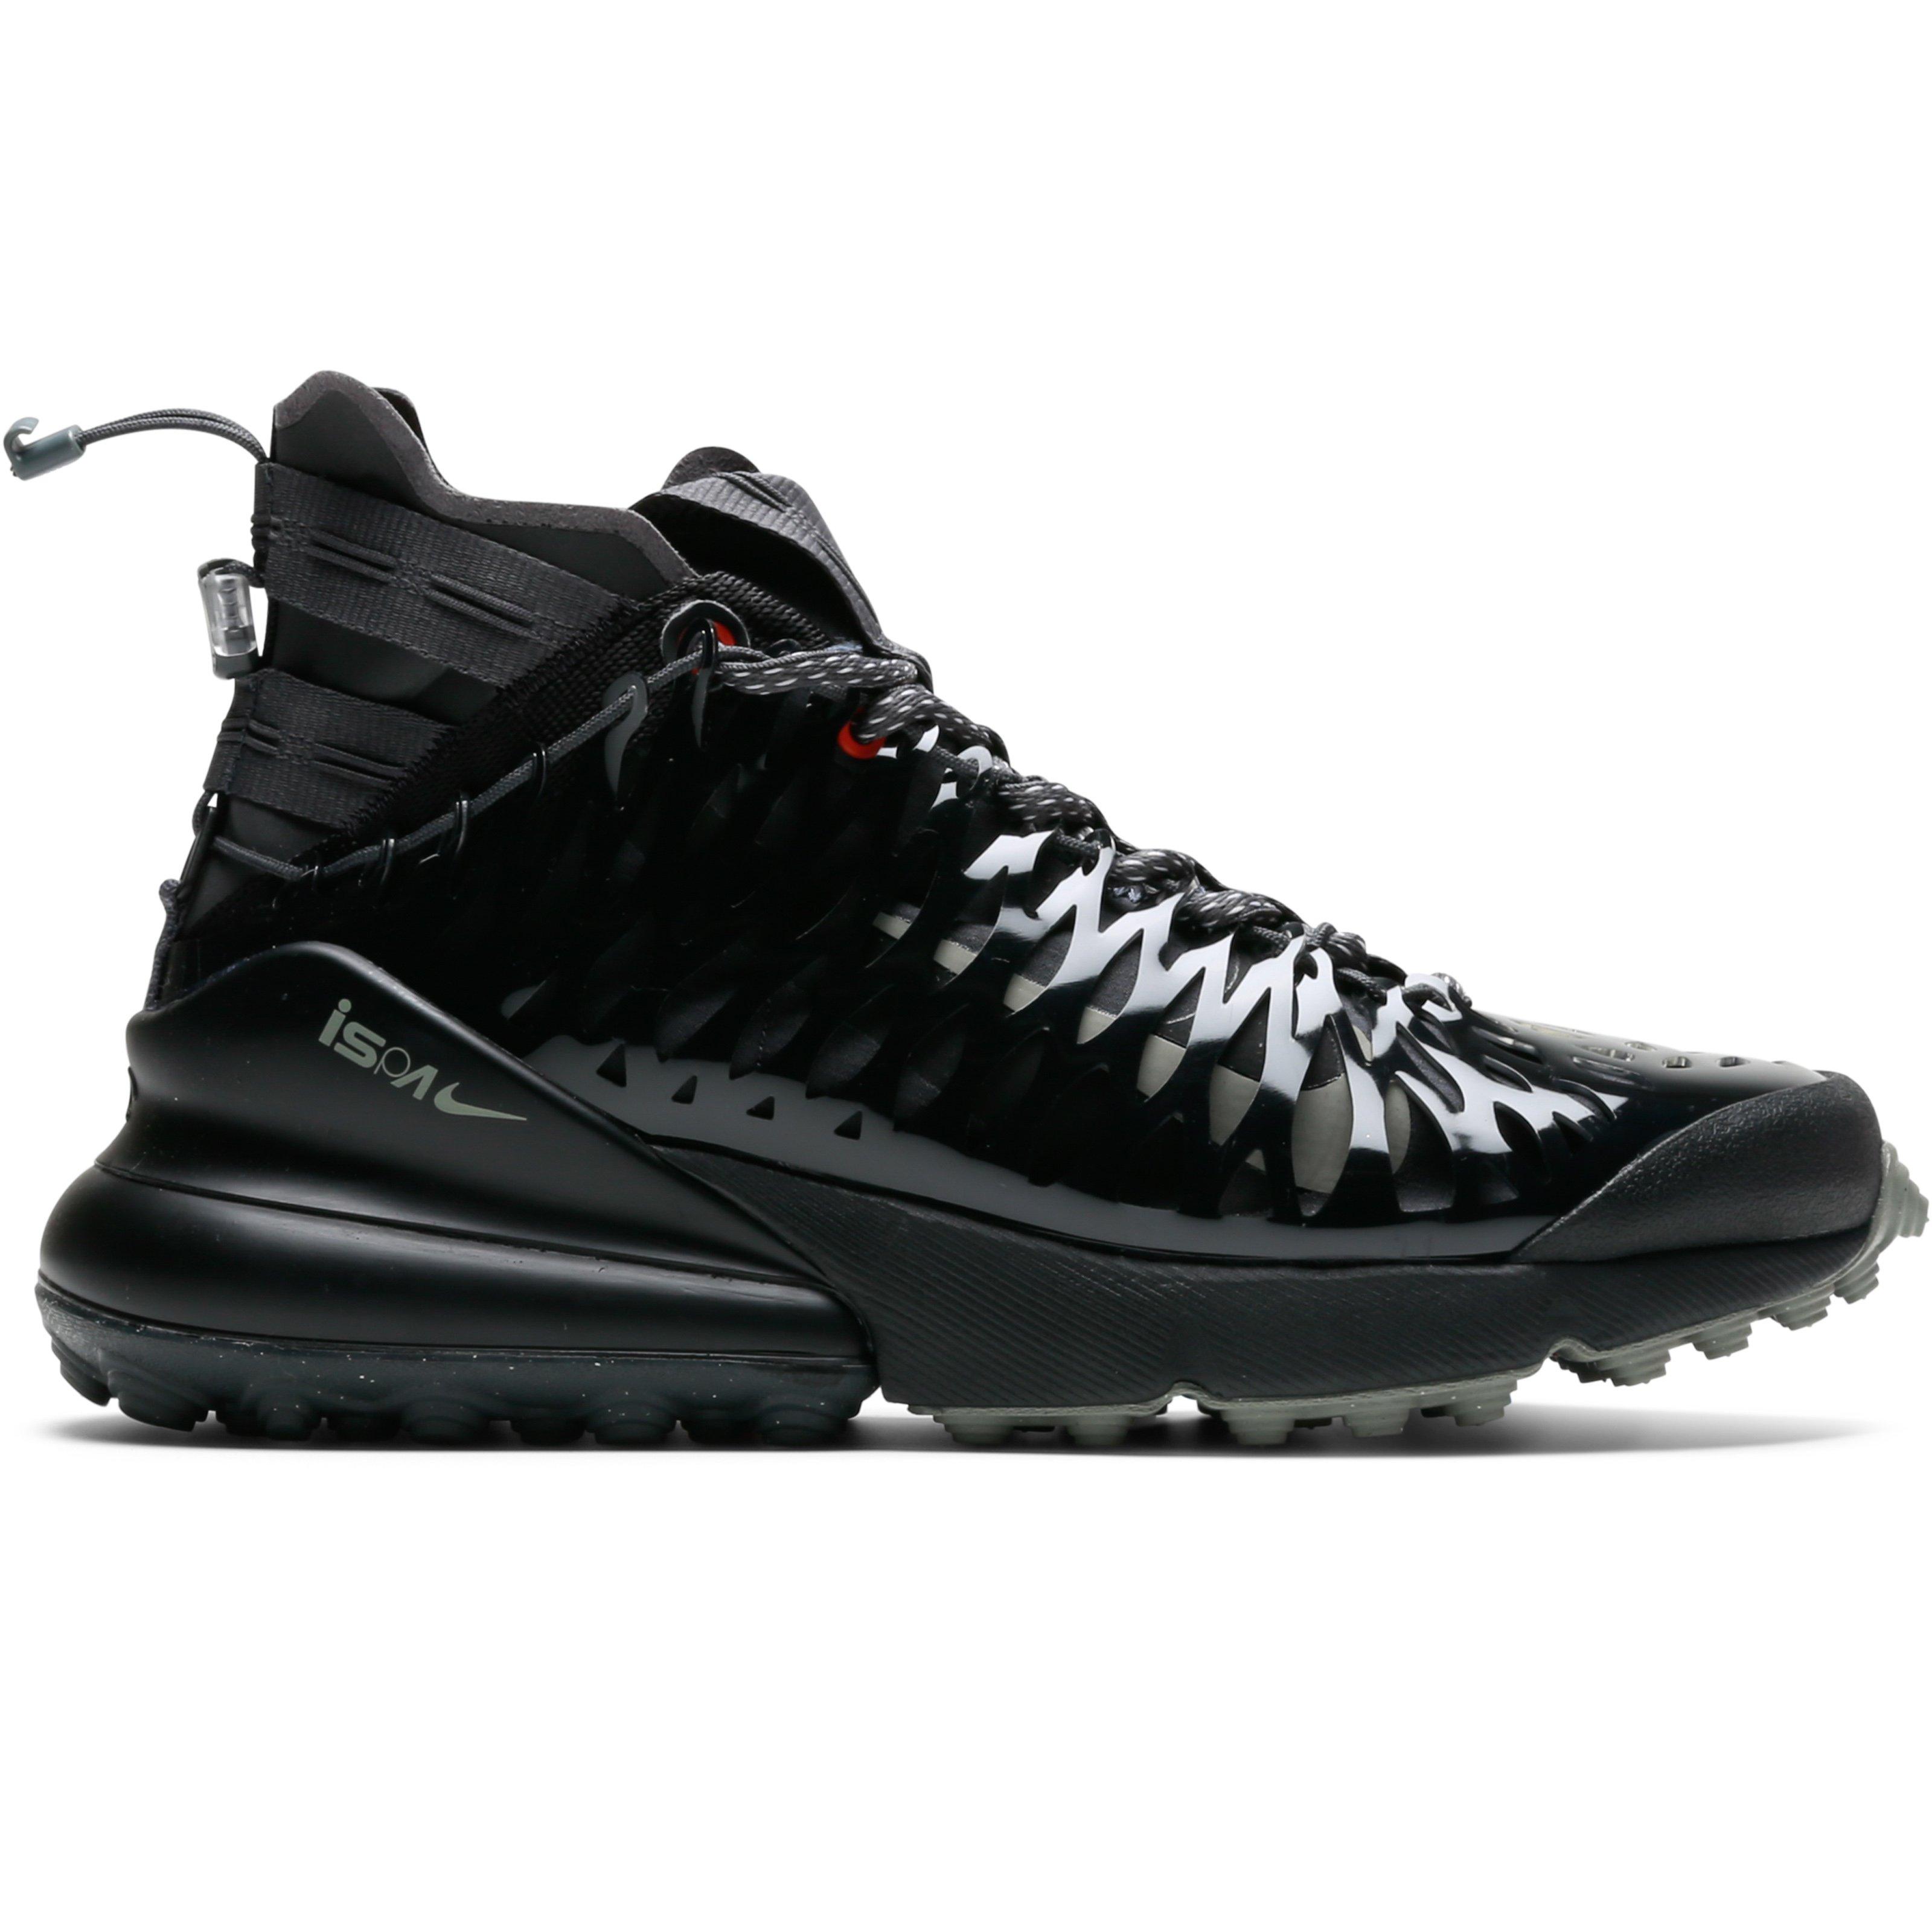 Lyst - Nike Air Max 270 Ispa in Black for Men - Save 22%